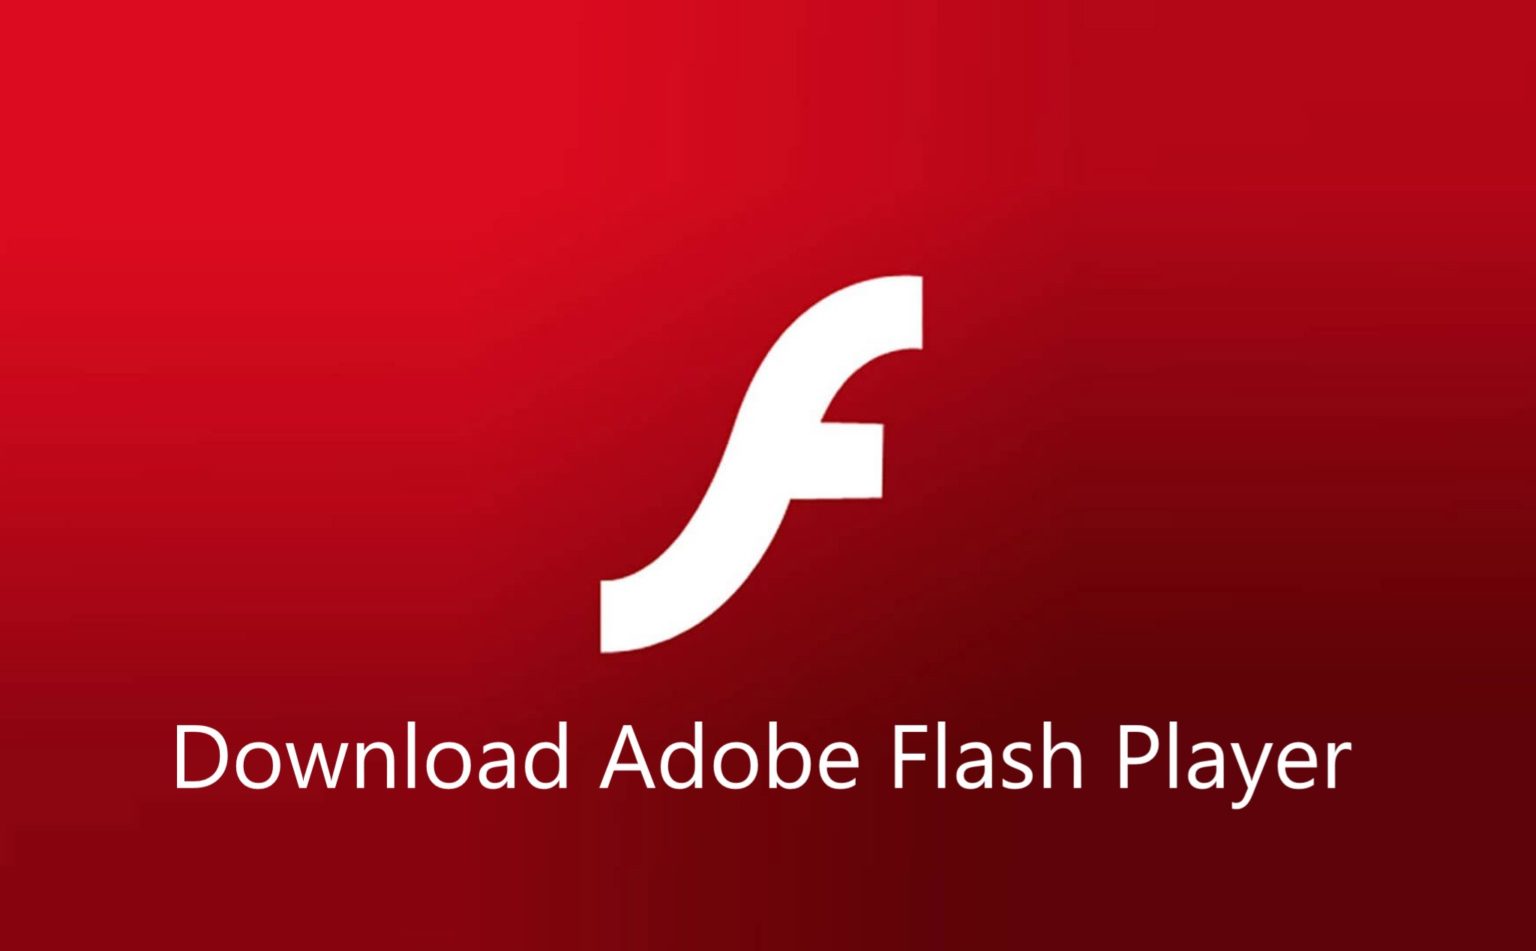 adobe flash player download for windows 8.1